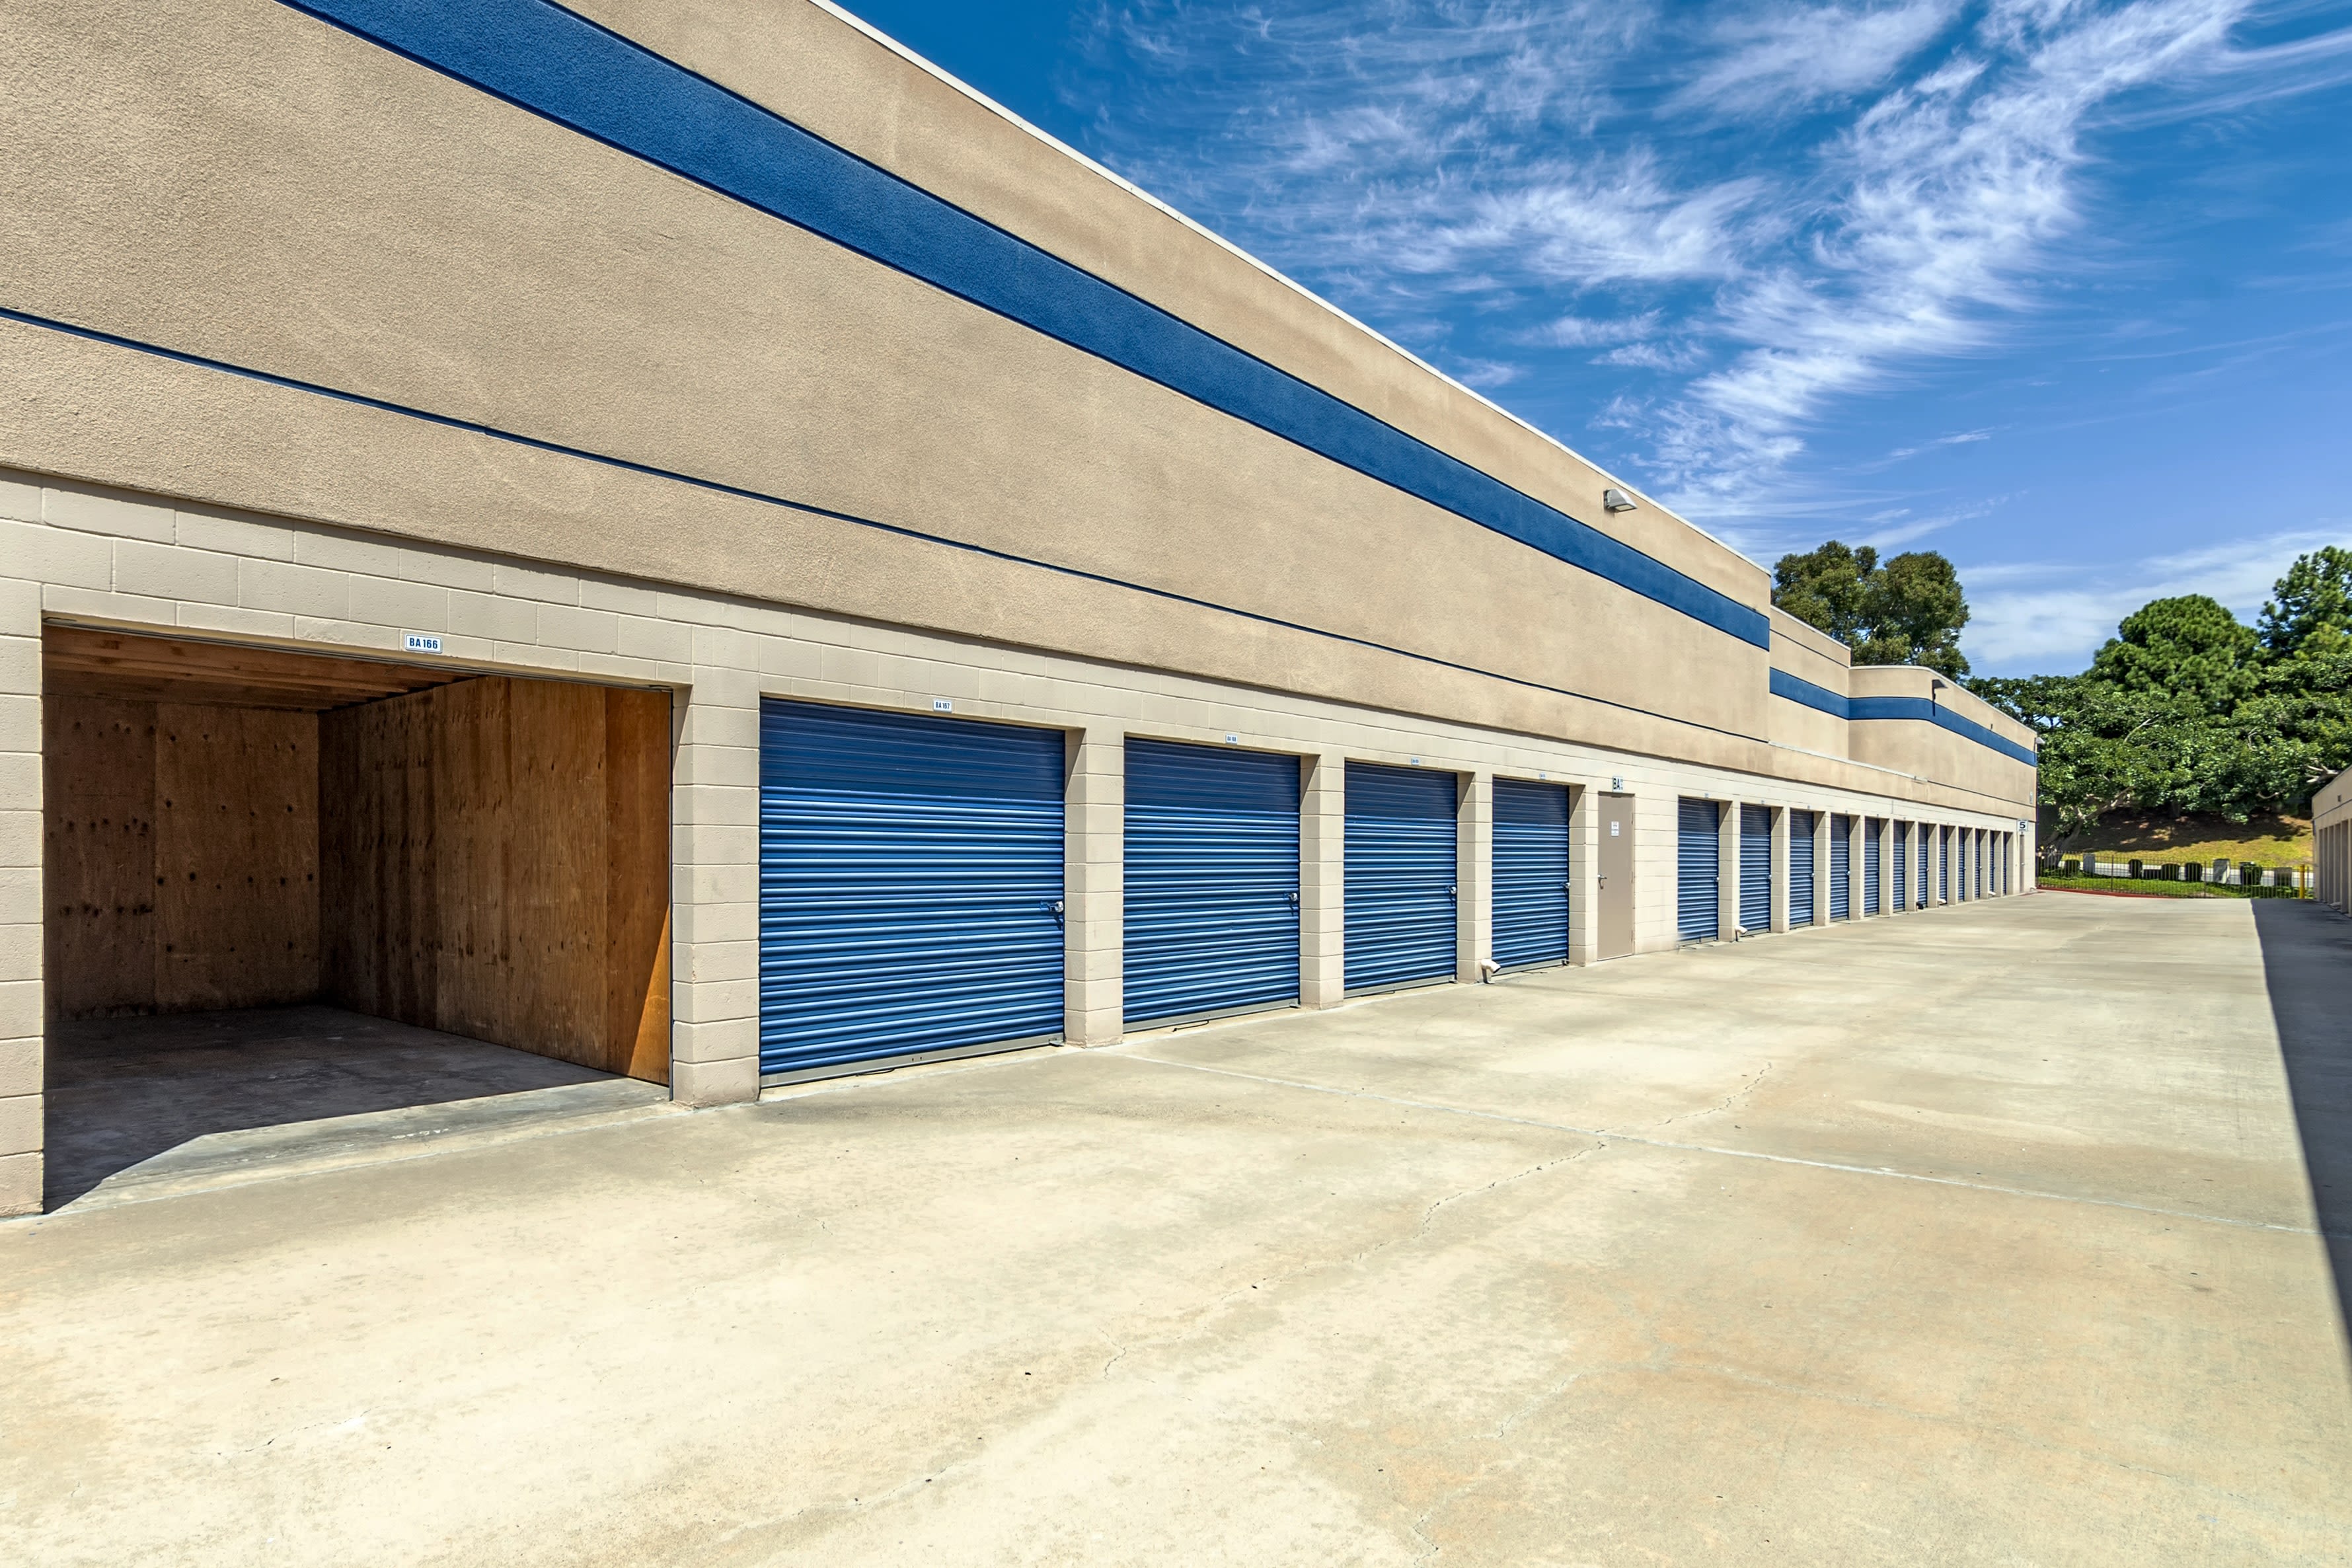 A row of outdoor storage units at Mira Mesa Self Storage in San Diego, CA